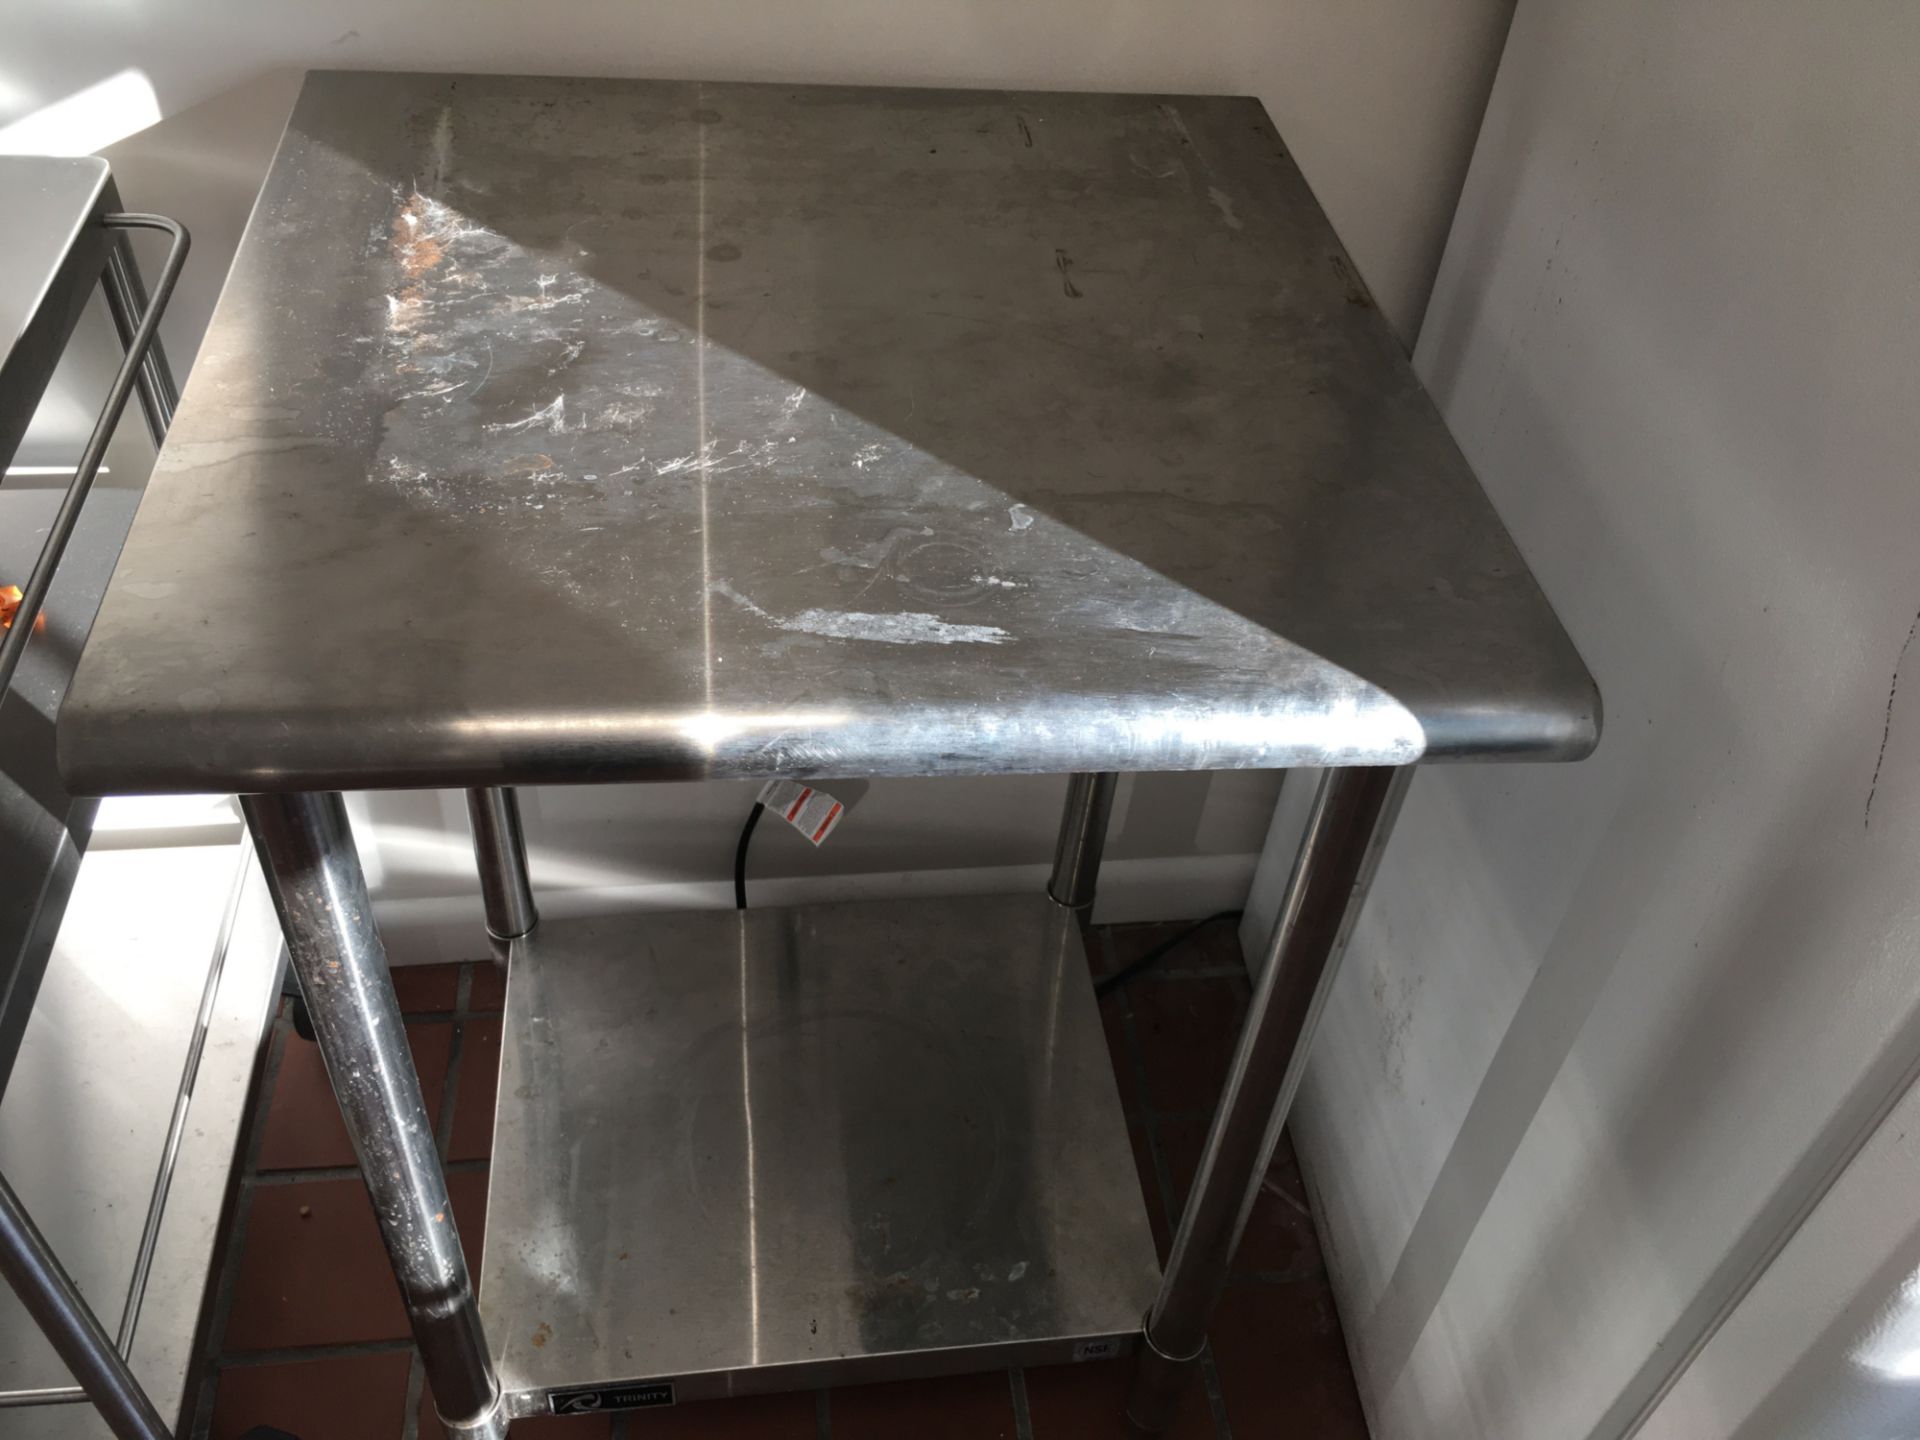 Trinity, 2-Foot Lab Table, Stainless Steel, 2-Tier - Image 4 of 5